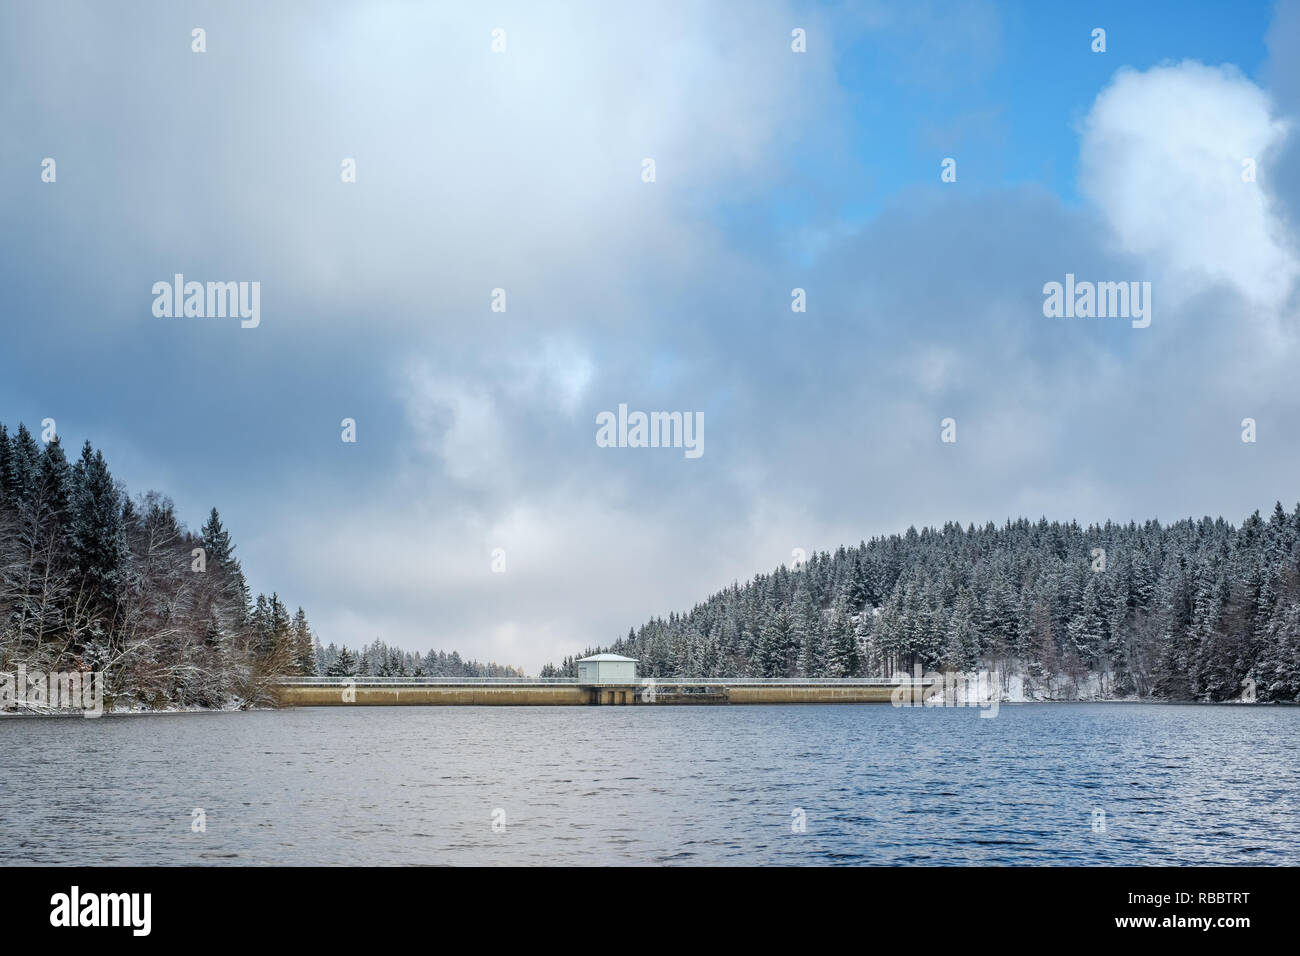 Page 8 - Staumauer High Resolution Stock Photography and Images - Alamy